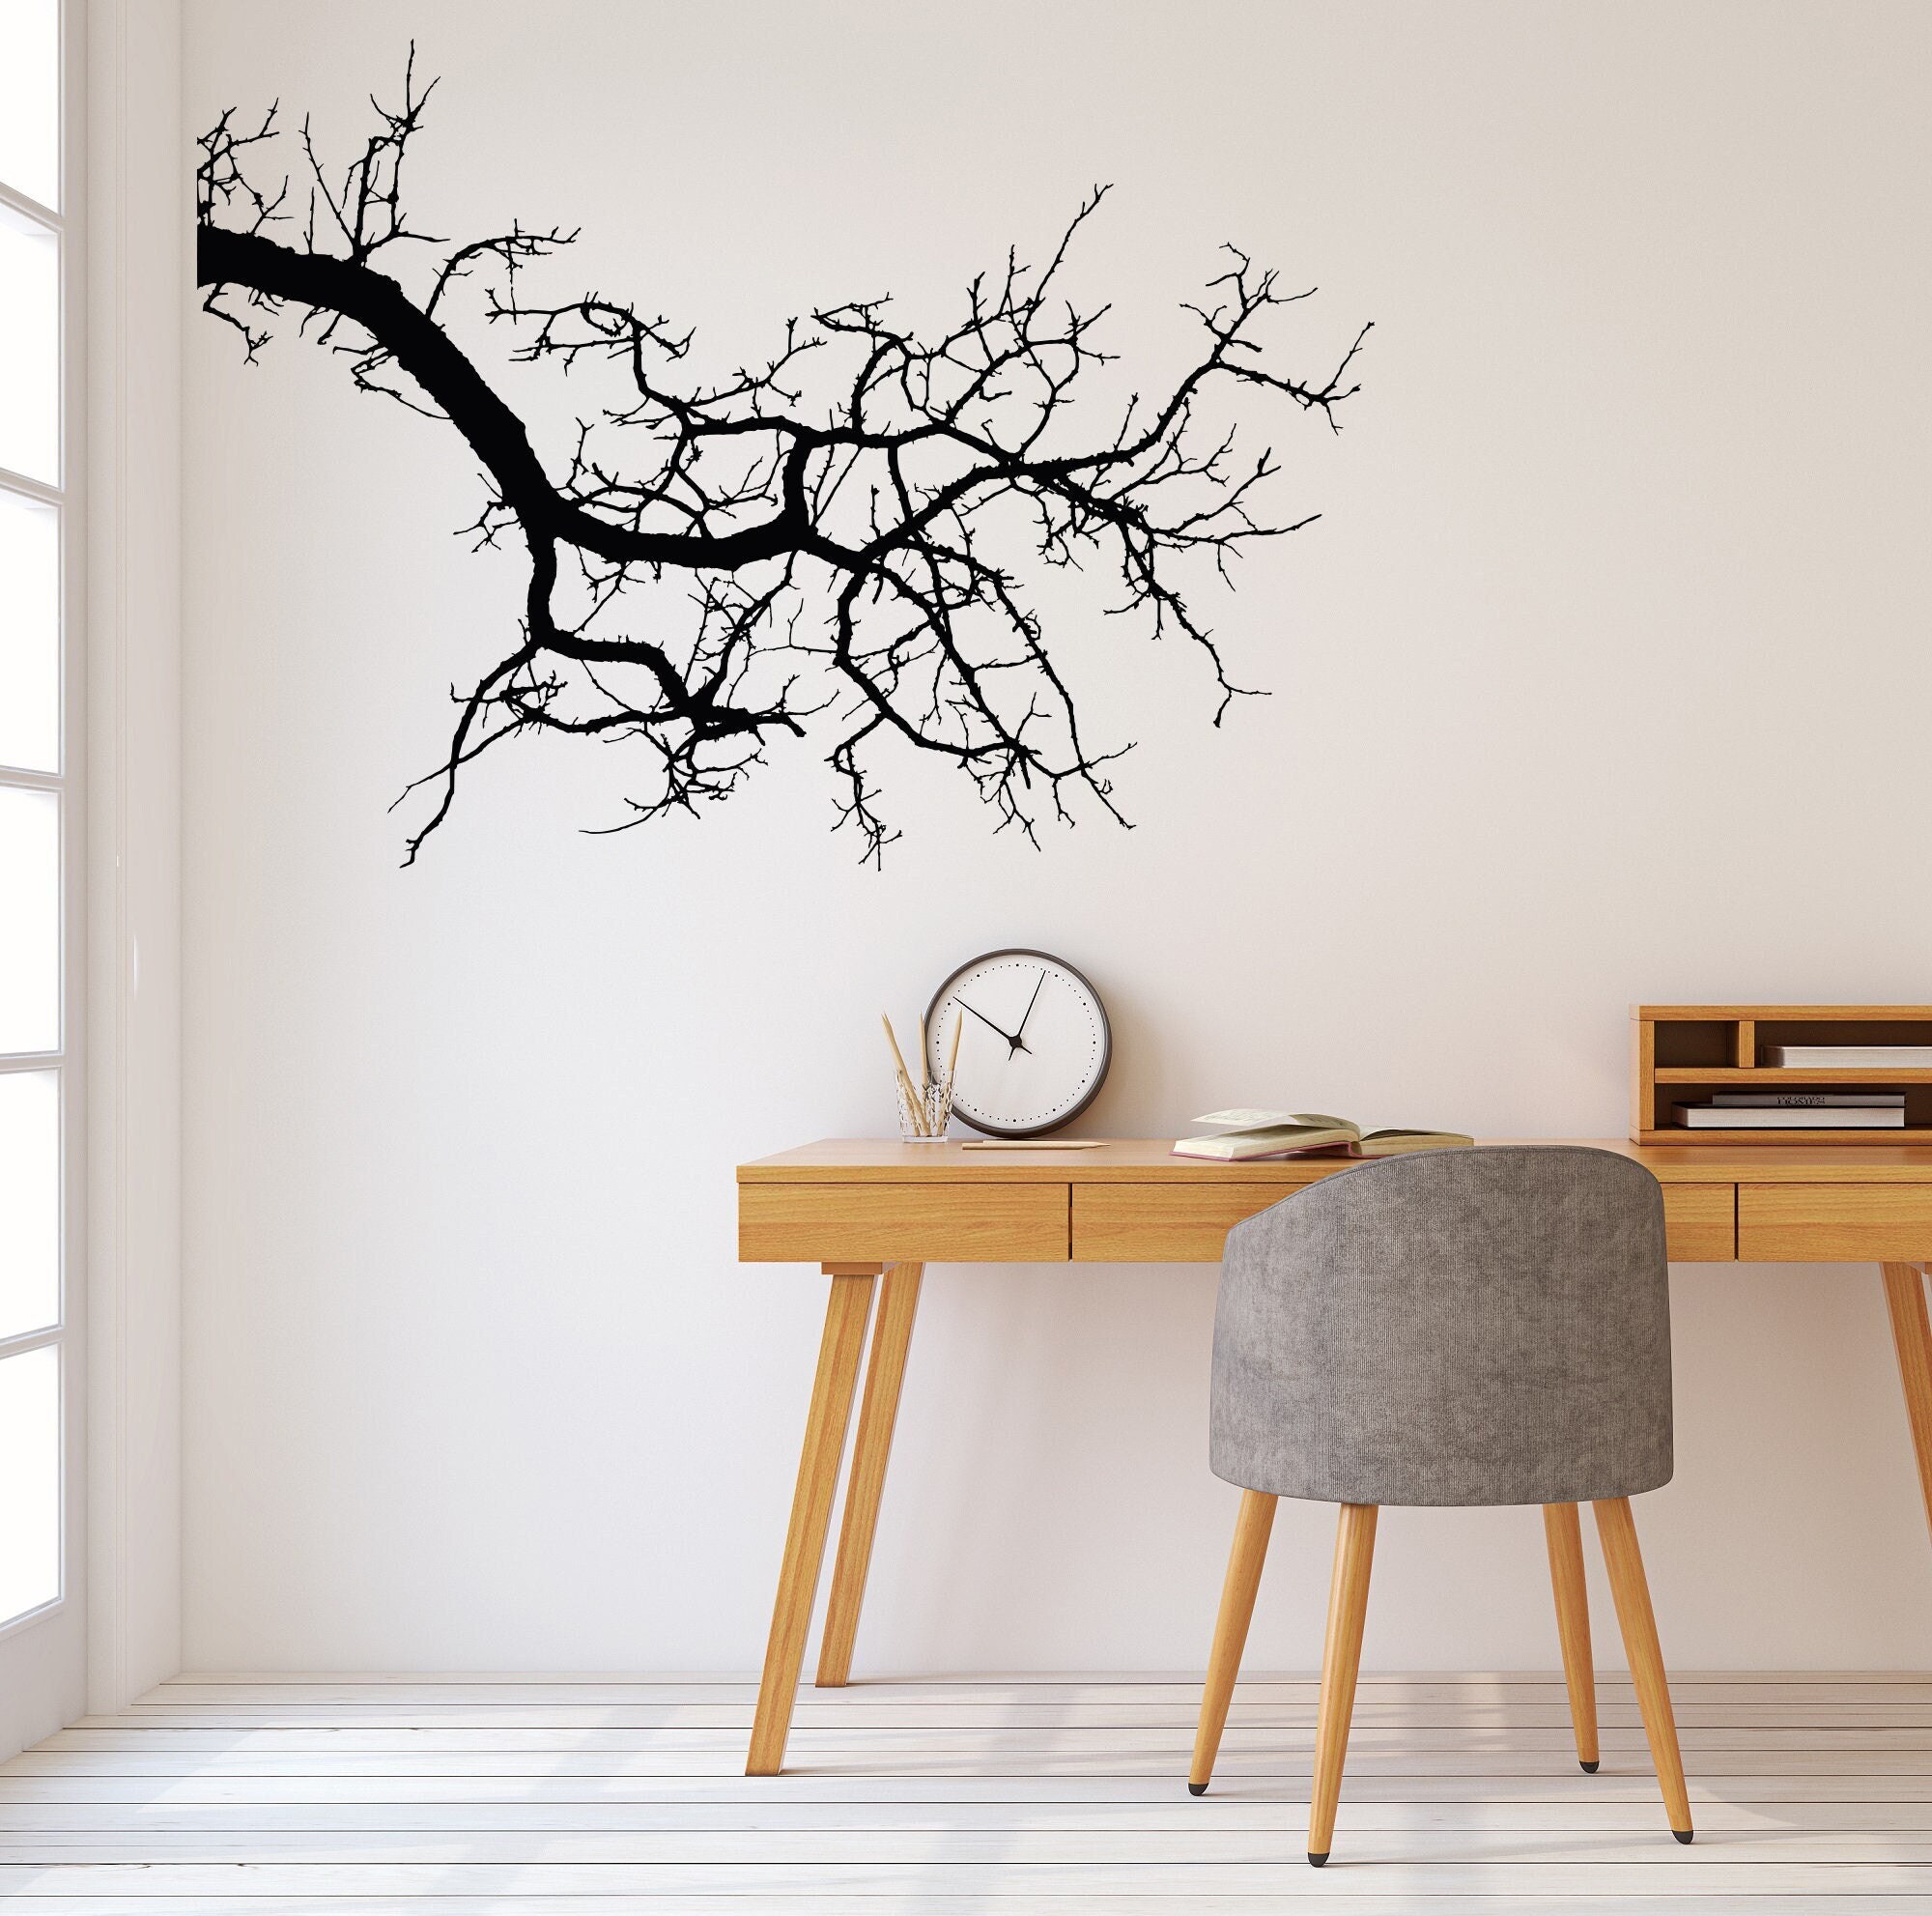 Large Wood Cut Floral Mural Nature Vinyl Wall Decal Graphic Stickers –  Wallternatives